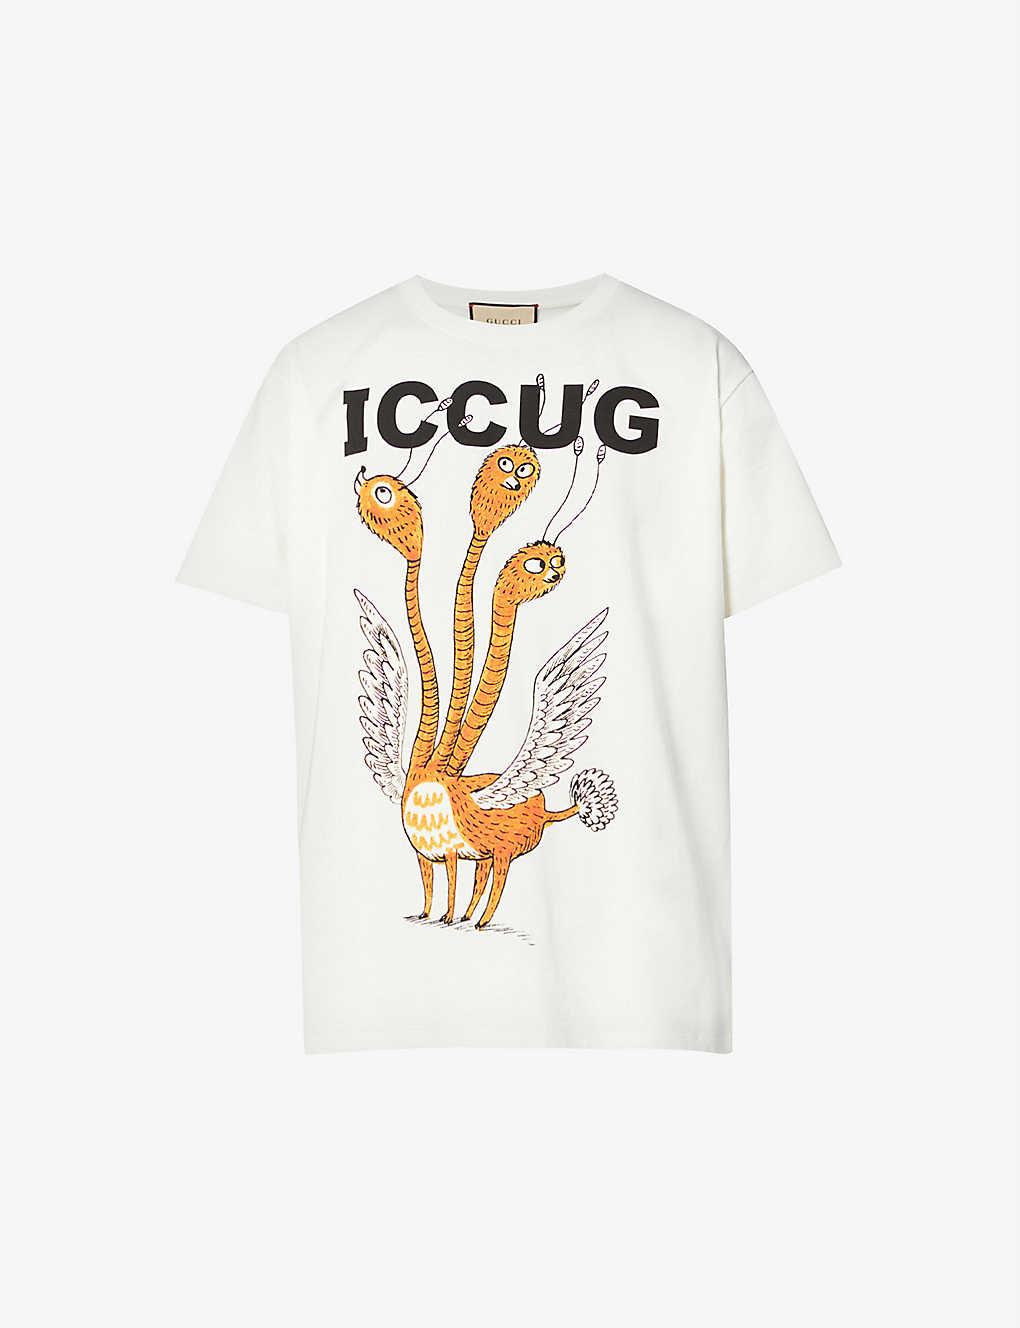 Gucci Iccug 3 Heads Cotton-jersey T-shirt in White for Men | Lyst